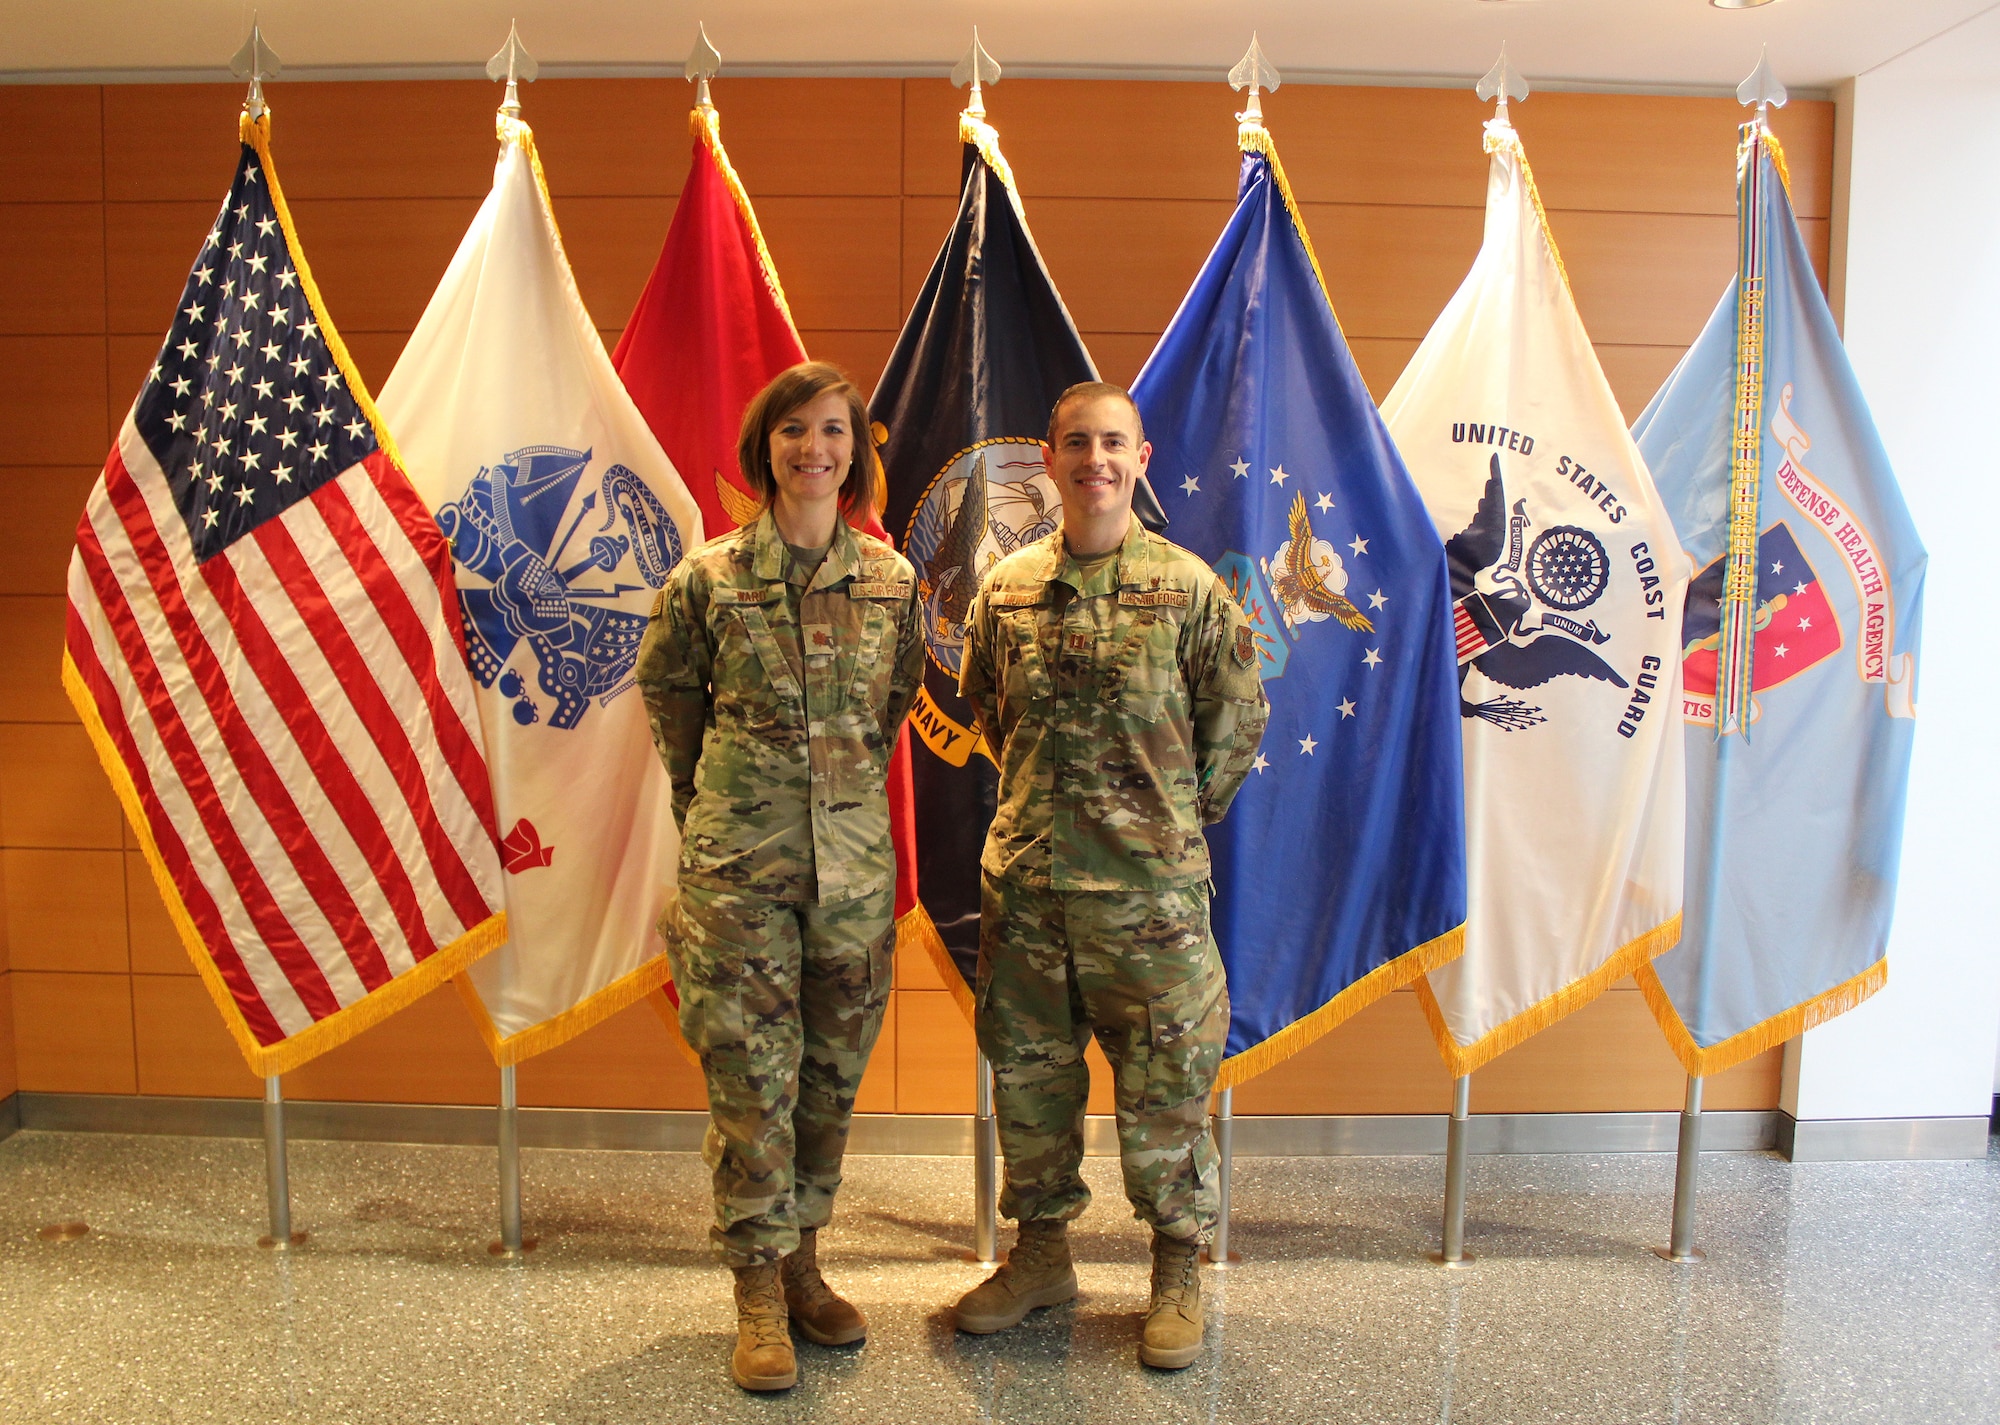 Image of two Airmen standing in front of flags.